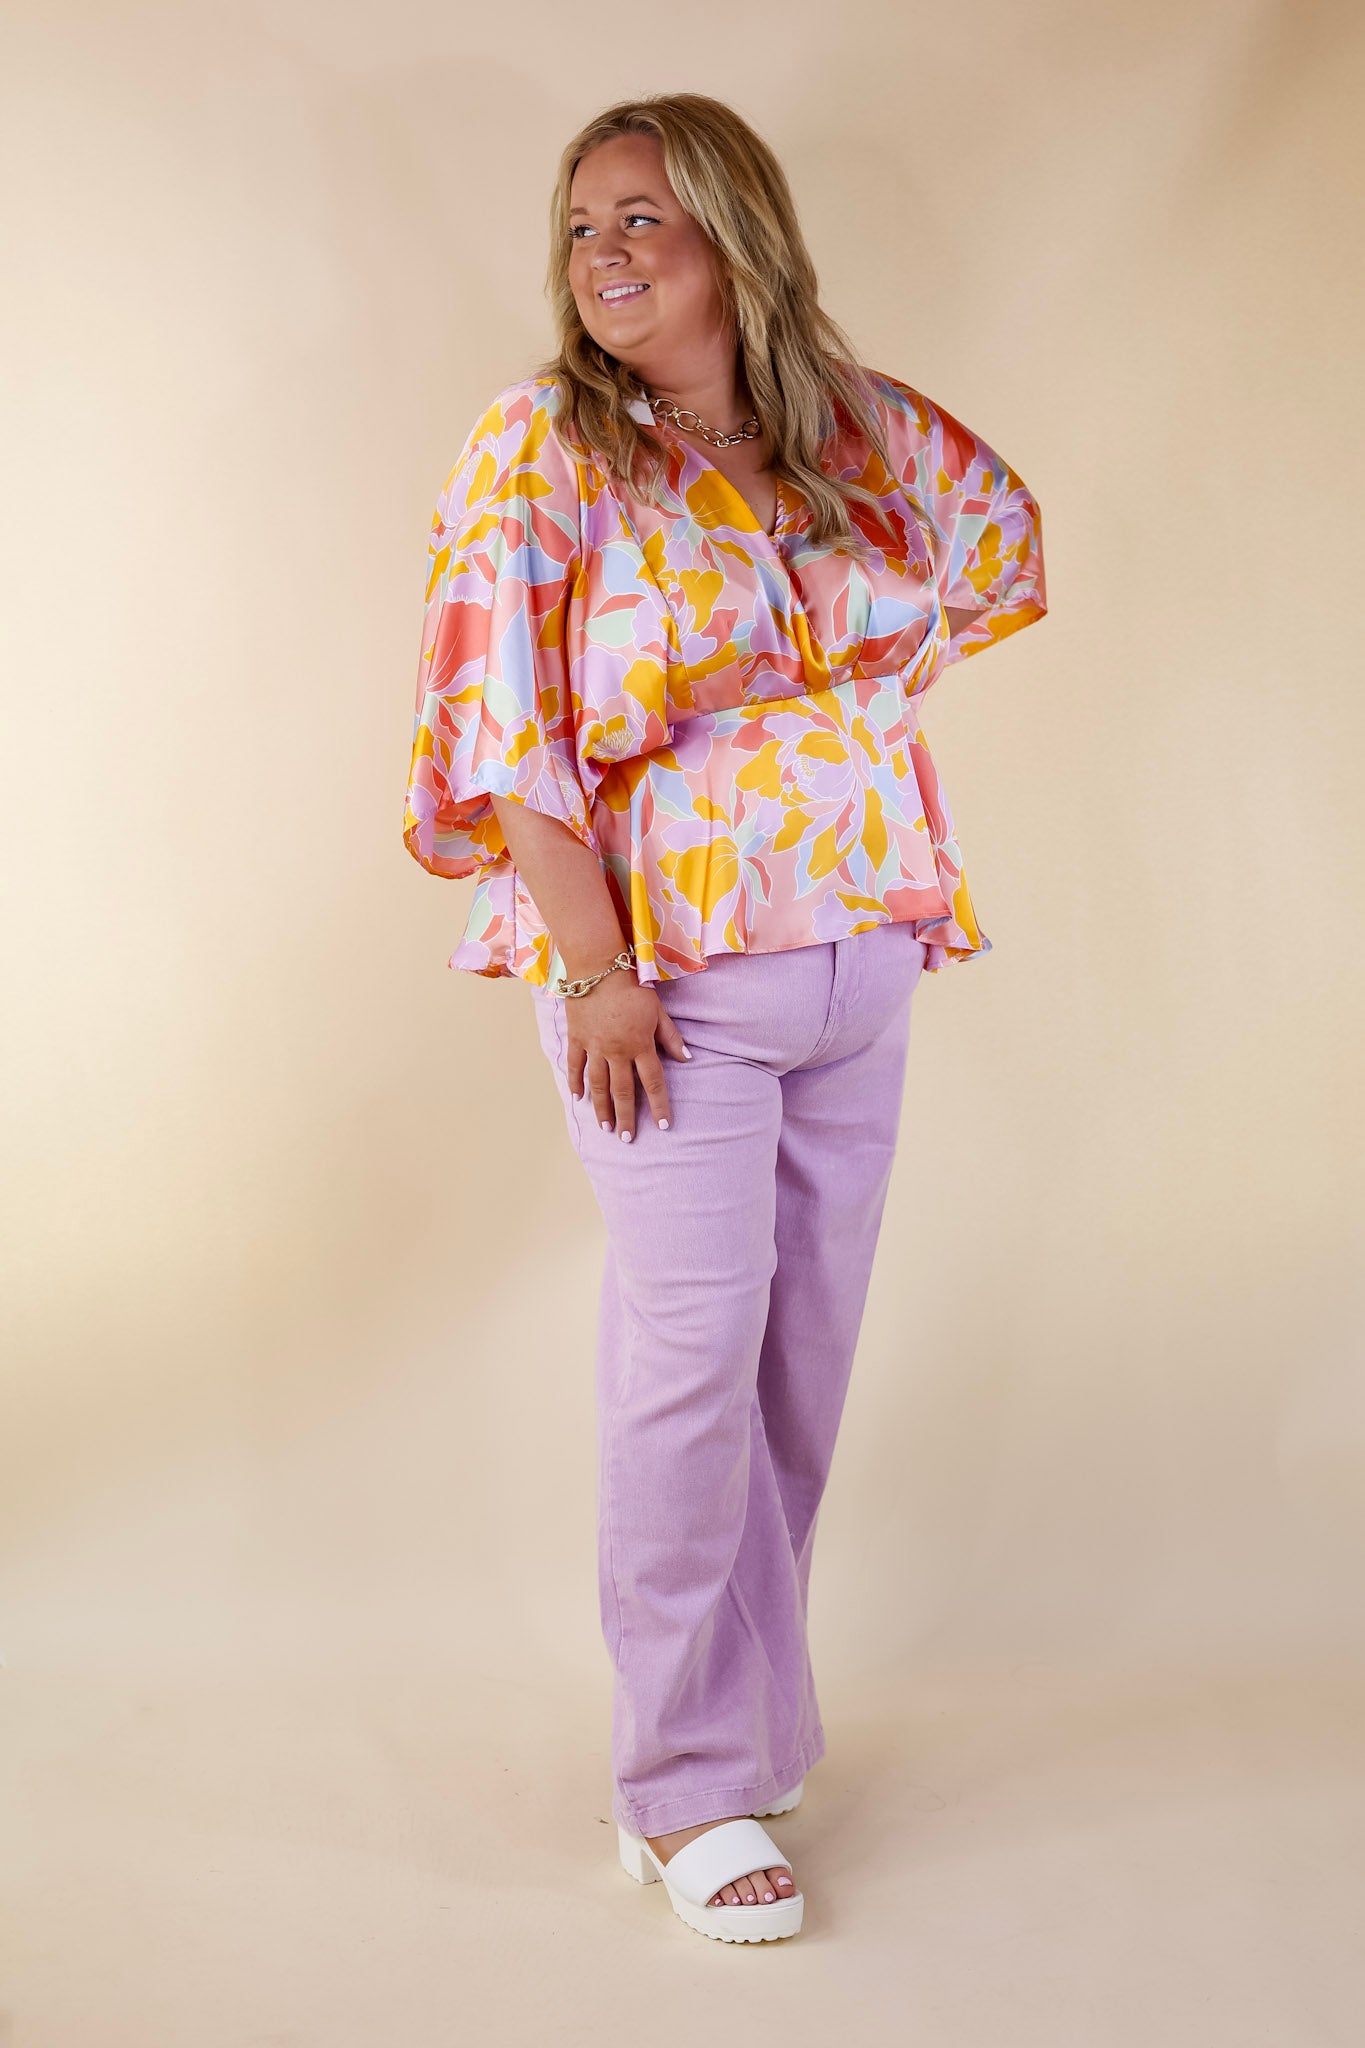 Hear the Music Drop Sleeve Satin Mosaic Print V Neck Peplum Top in Coral Pink Mix - Giddy Up Glamour Boutique